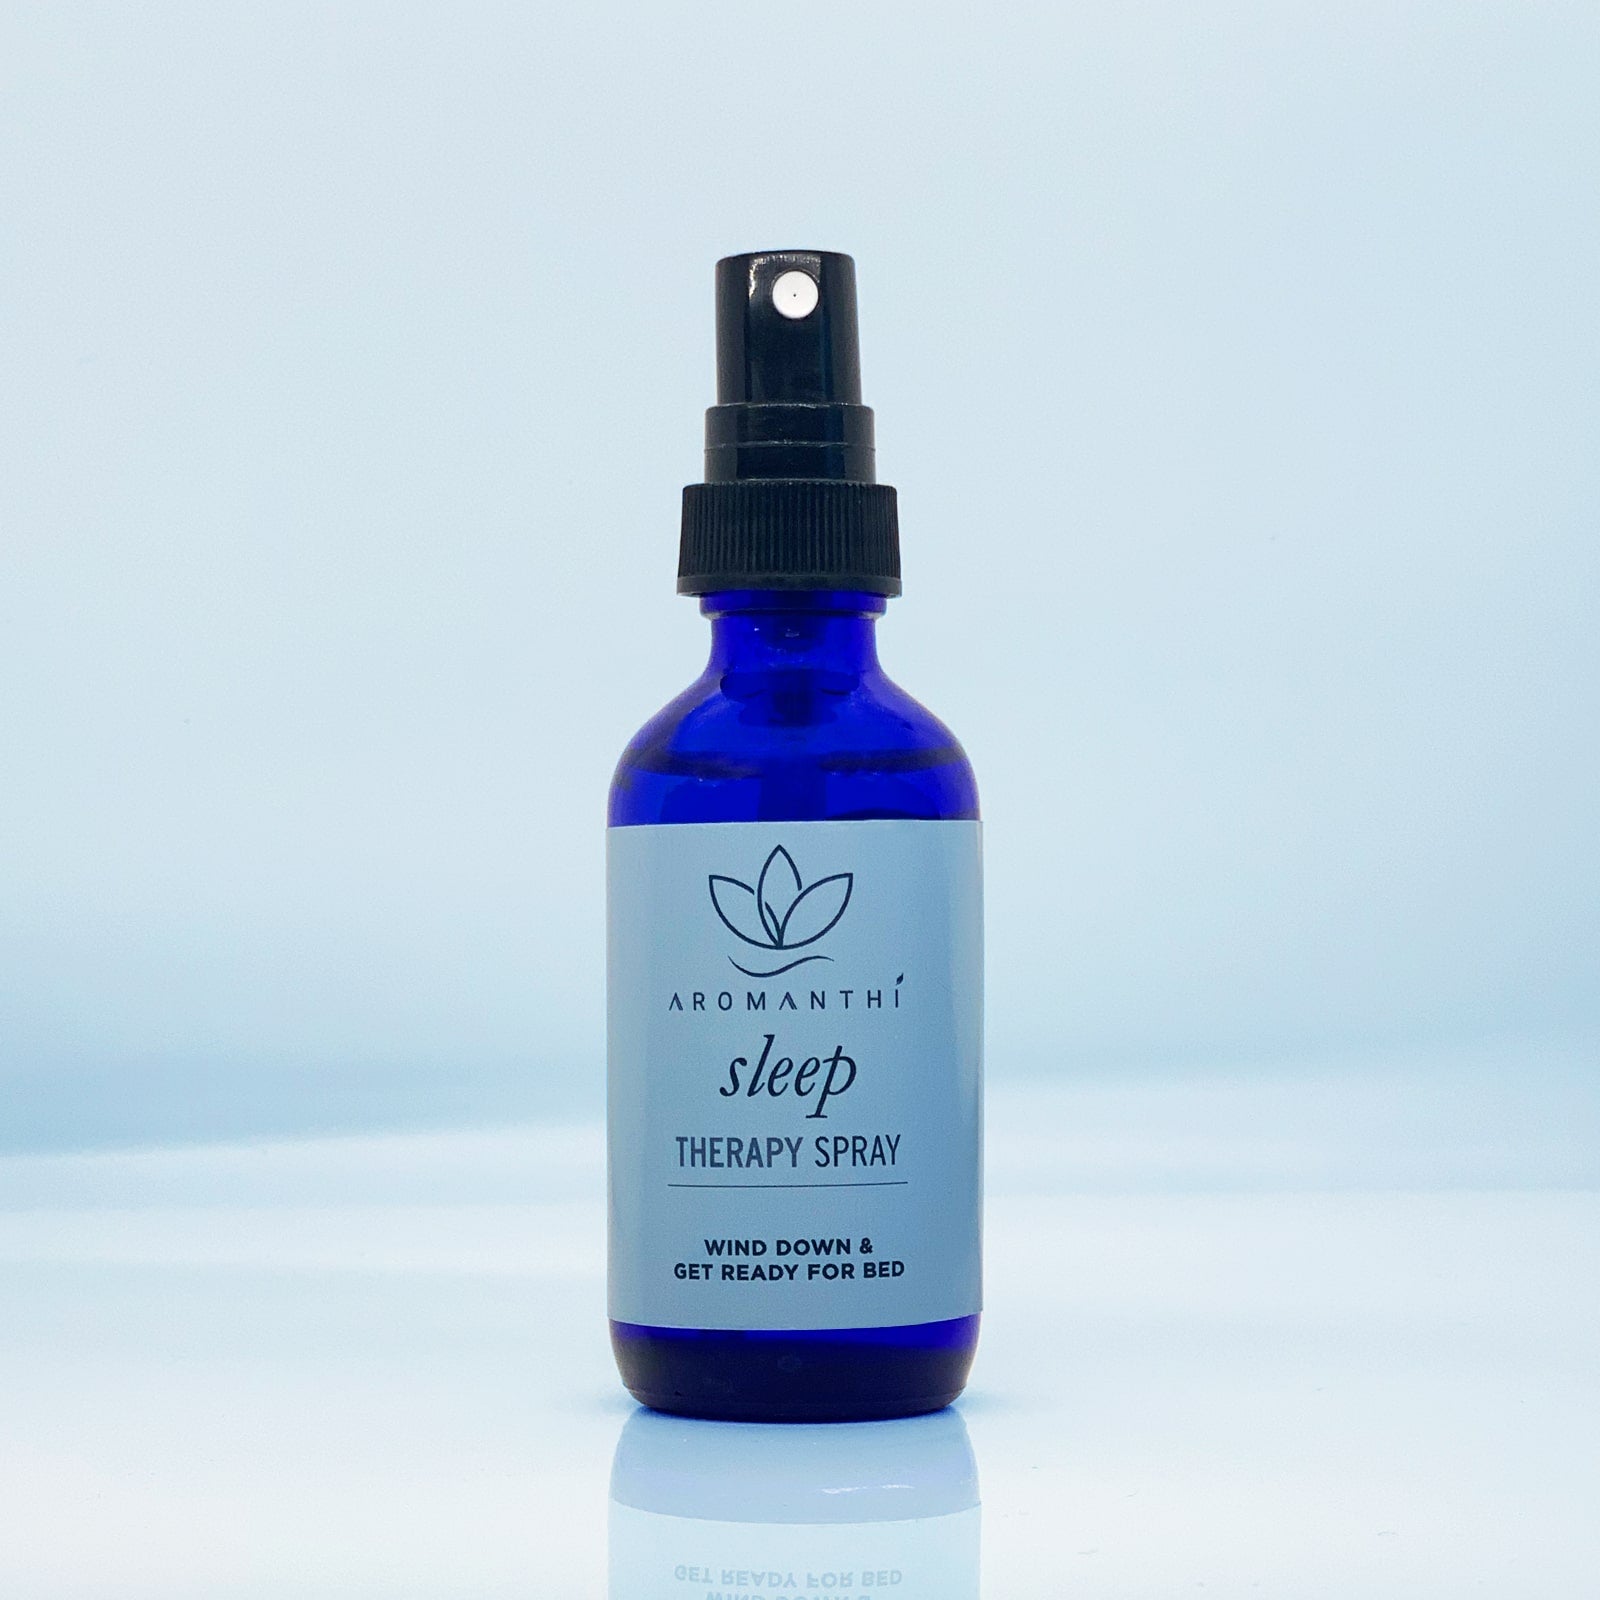 Sleep Therapy Spray - Aromanthi Clean Beauty and Wellness Shop. Made with essential oils like lavender and chamomile to bring the natural therapeutic benefits of healthier sleep rituals with aromatherapy. Shake and spray for simple self-care.